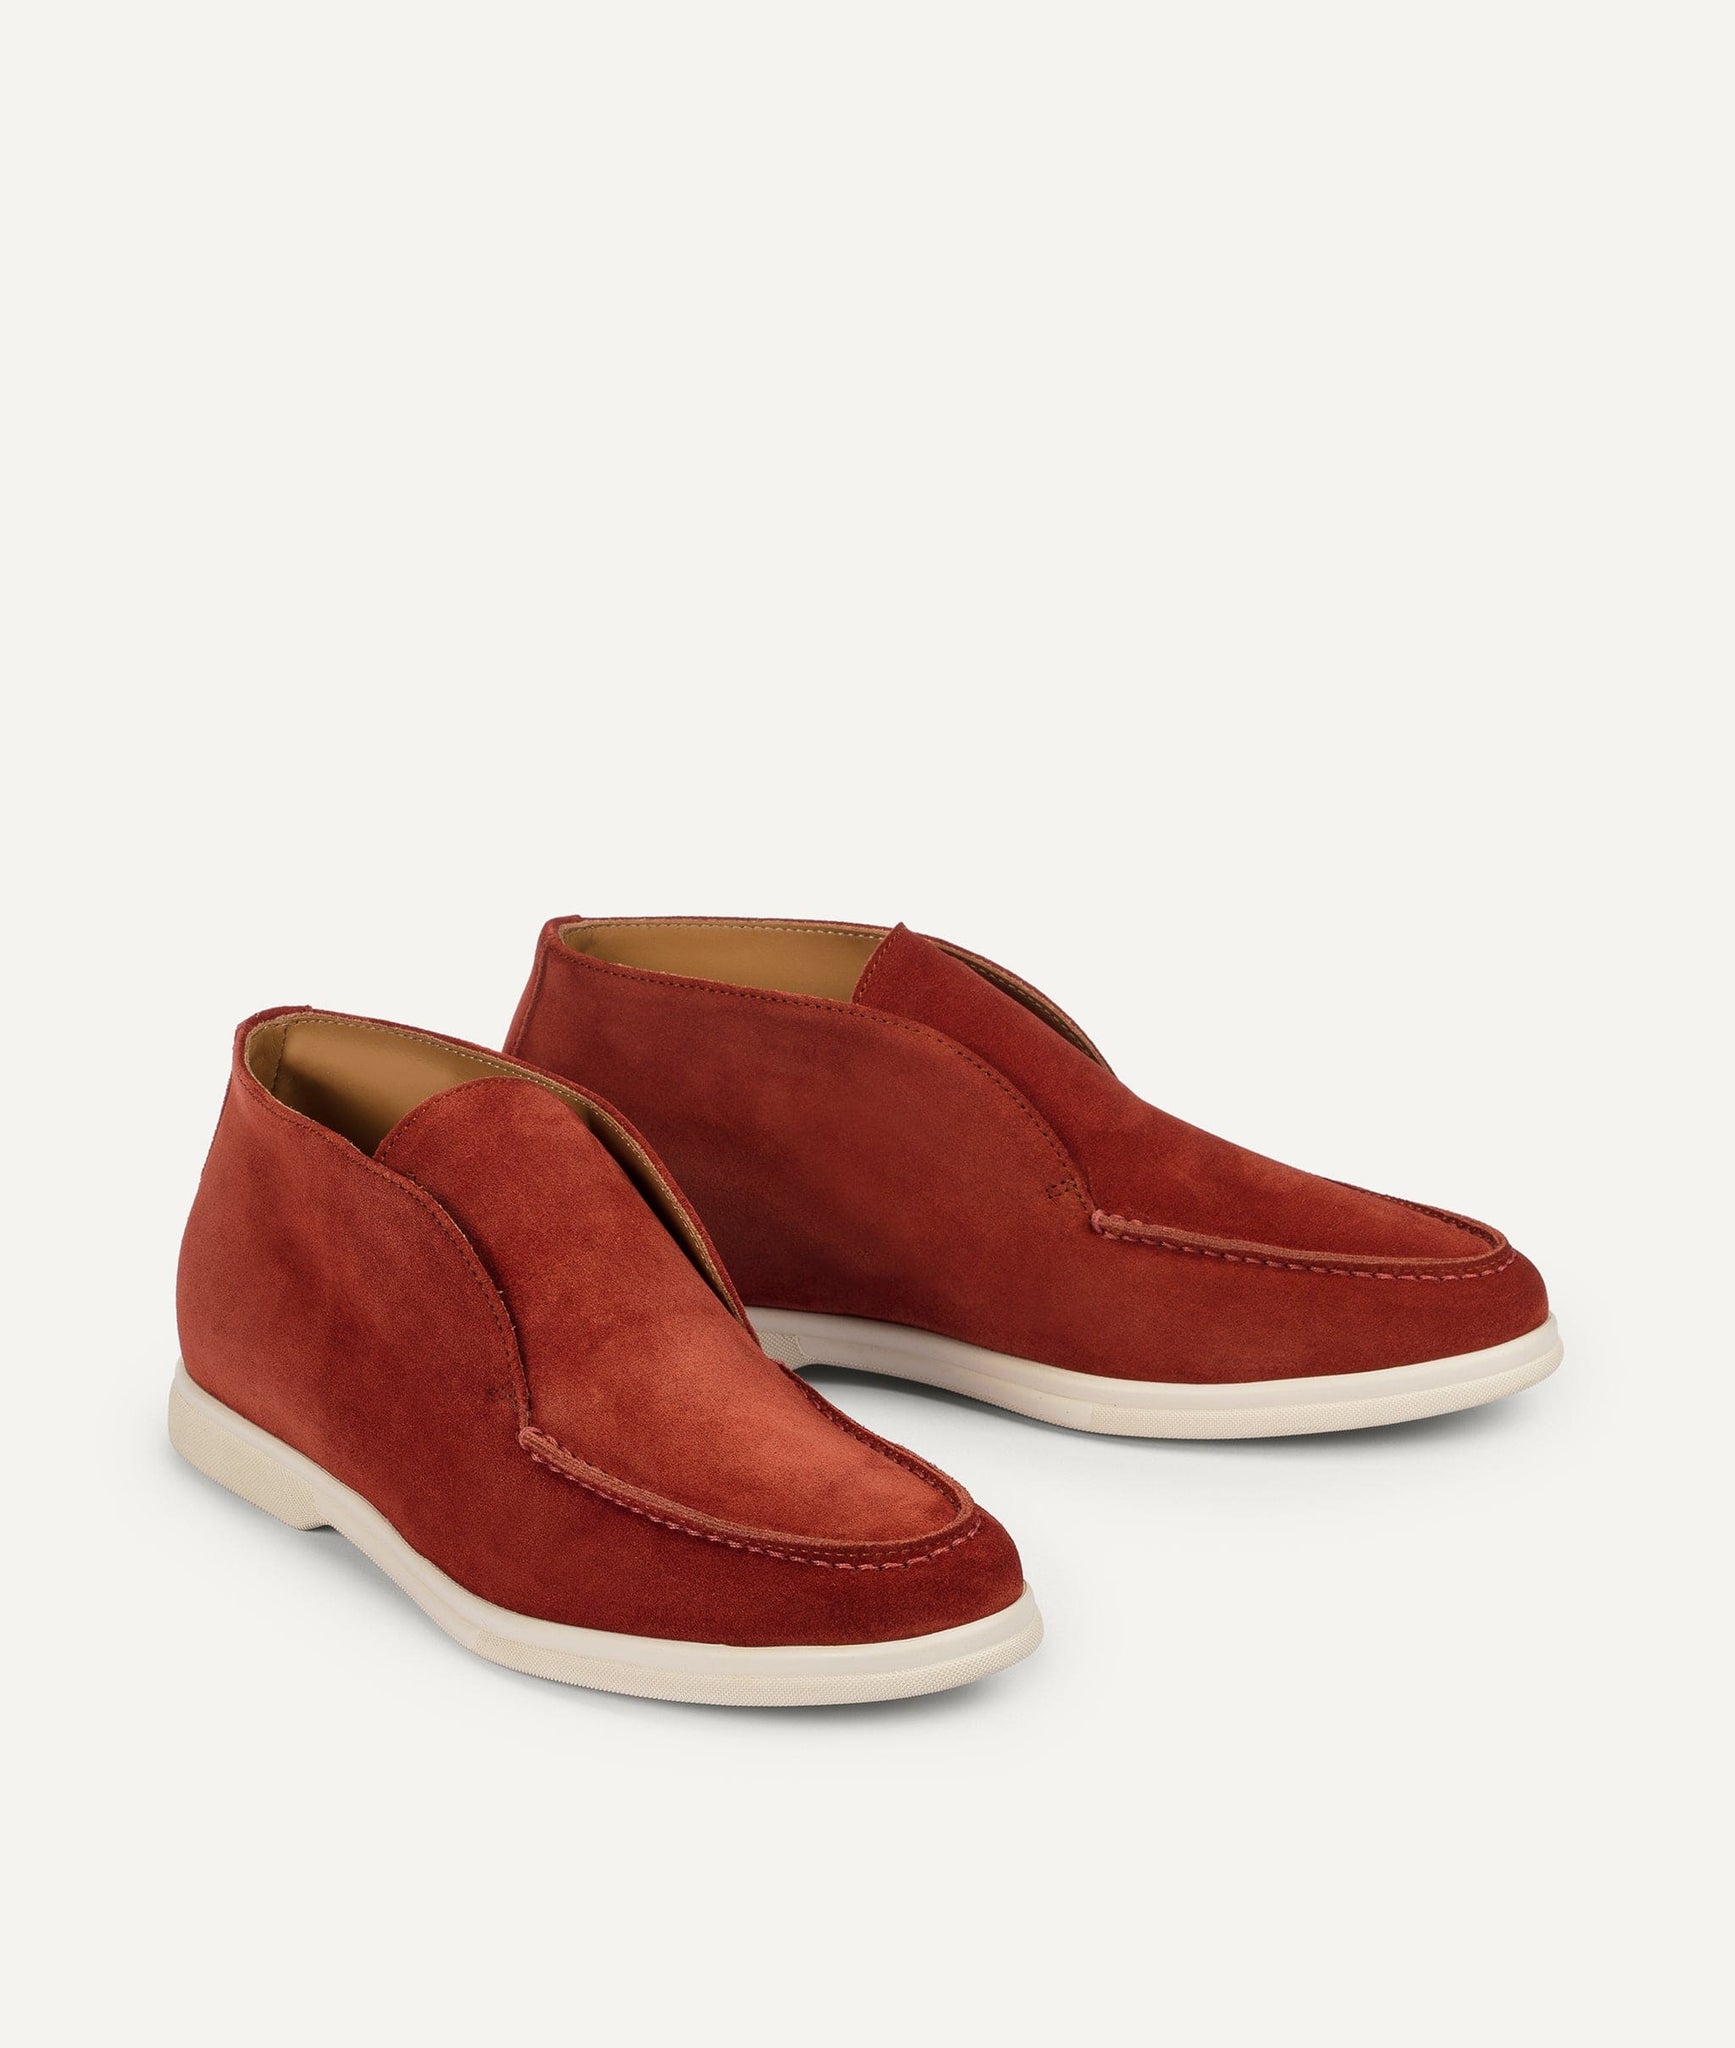 Ankle Boot Slipper in Suede